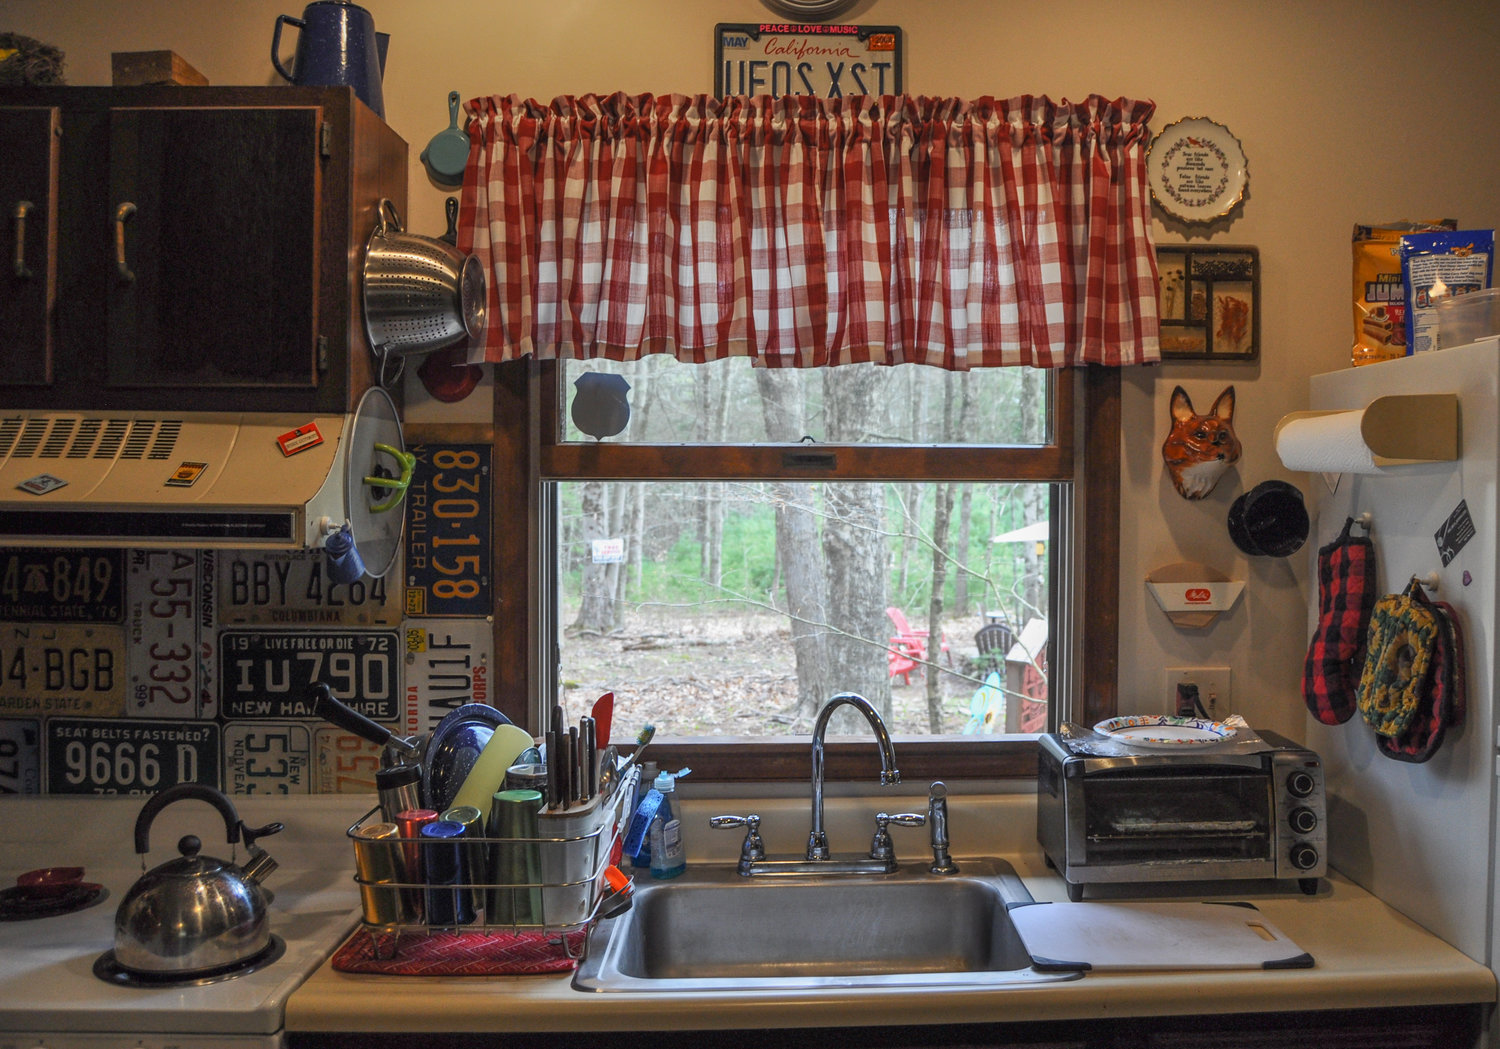 The view from the kitchen sink. Note the fox-shaped string holder on the right.